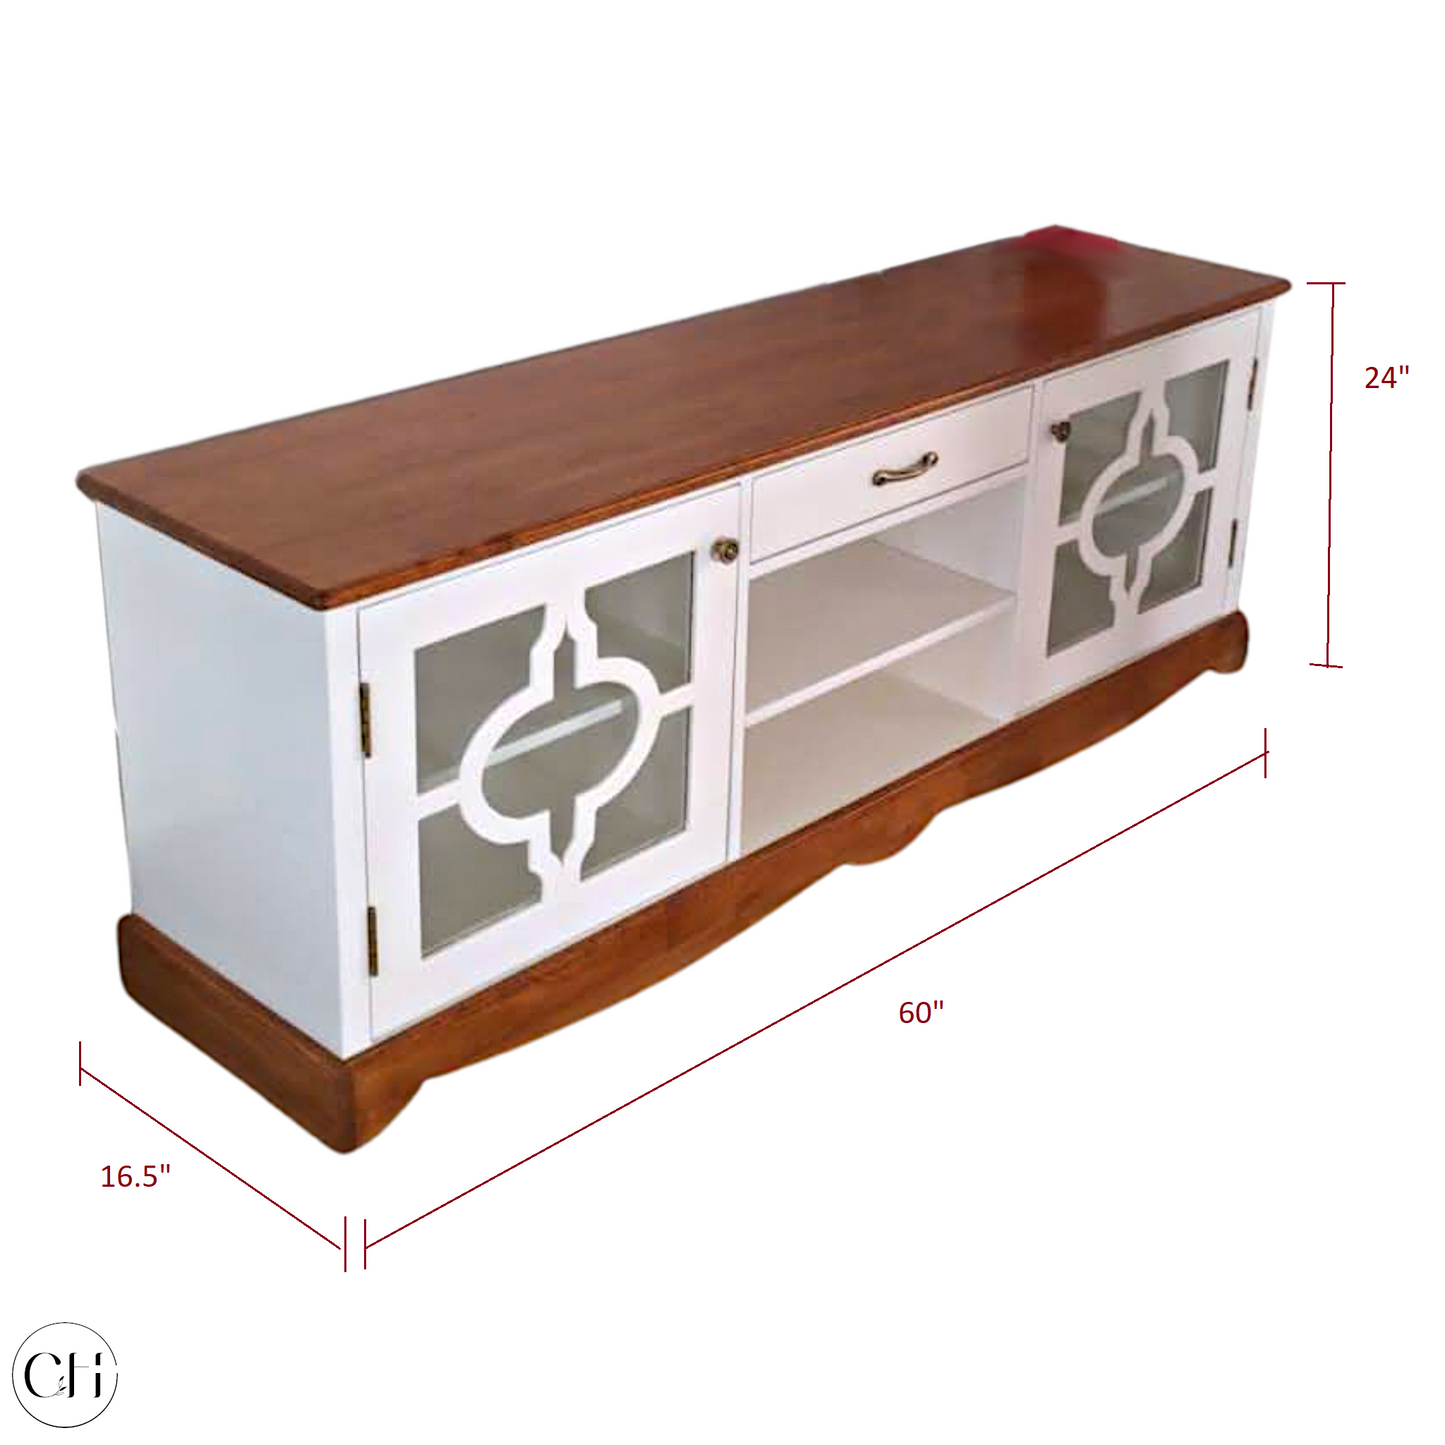 CustHum Venetia - Wooden TV Stand in white and wood tone, two doors on the side with onate design on glass panels, drawer and two open shelves in the middle (dimensions)